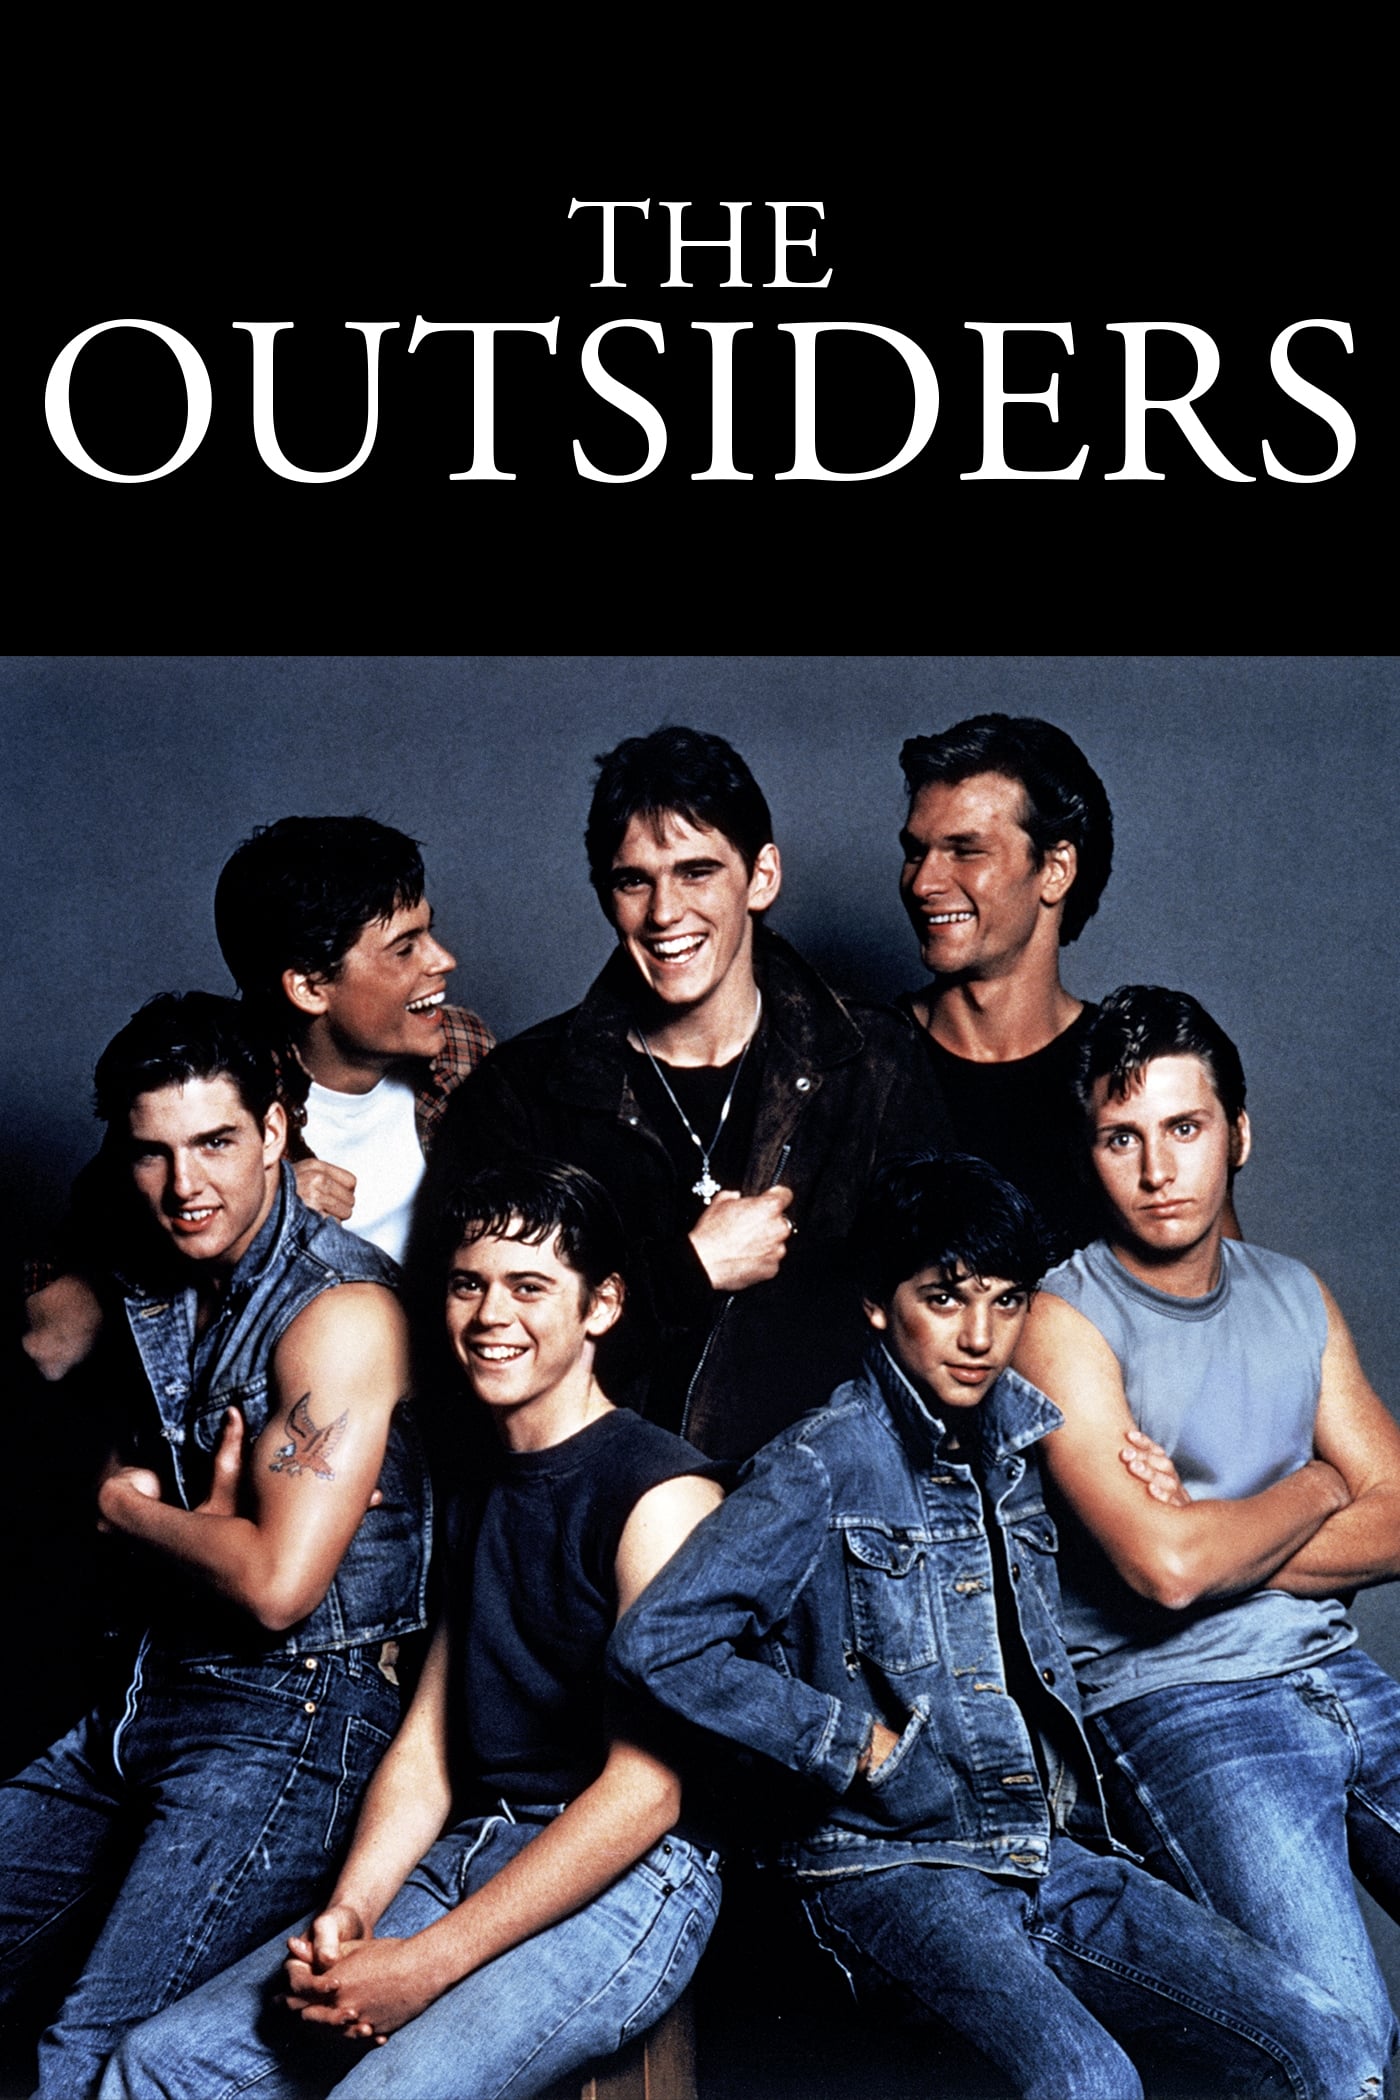 The Outsiders (1983) Cast & Crew | HowOld.co